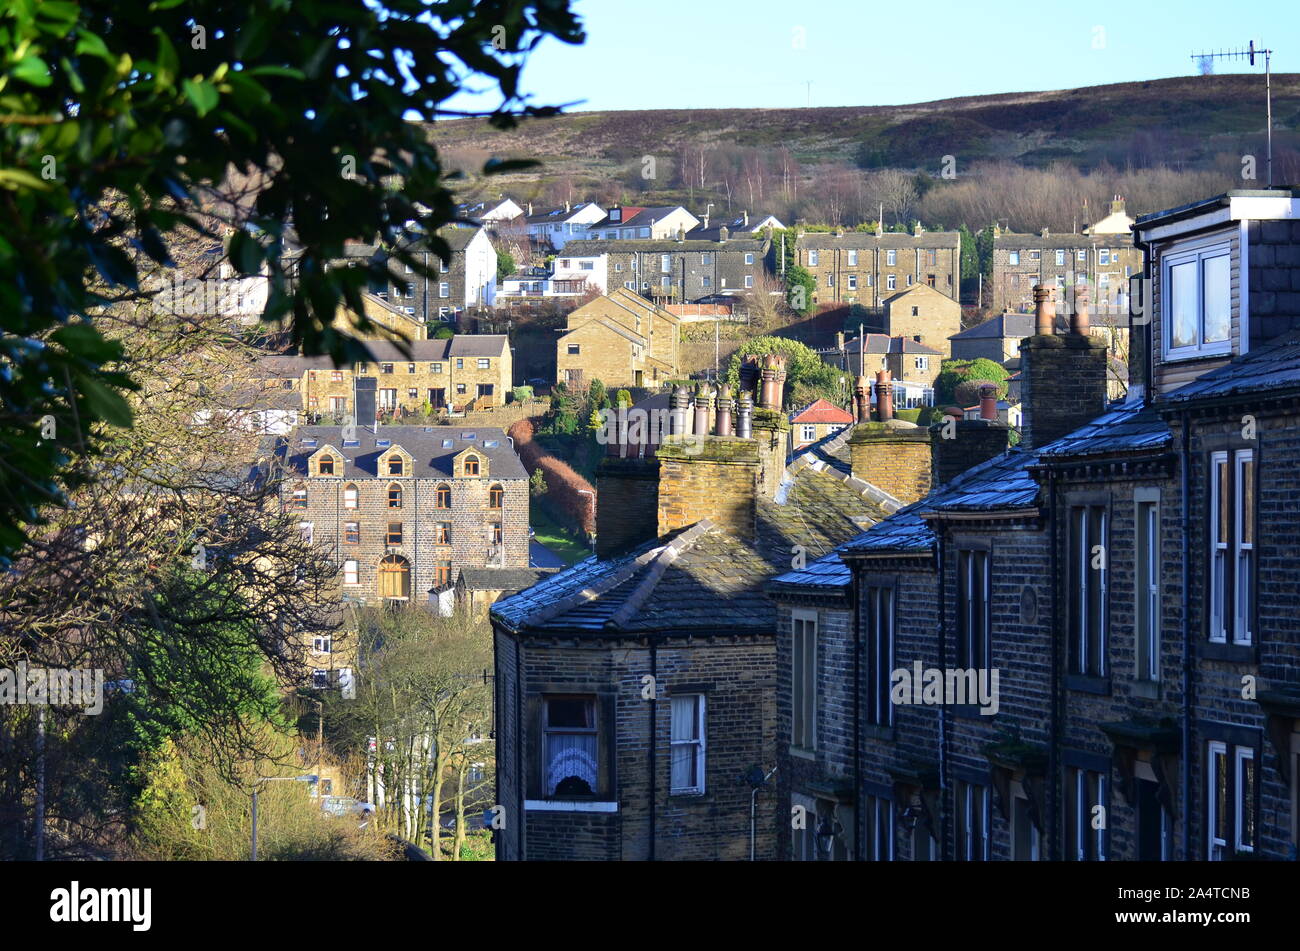 Houses on the hill side, Haworth, Yorkshire Stock Photo